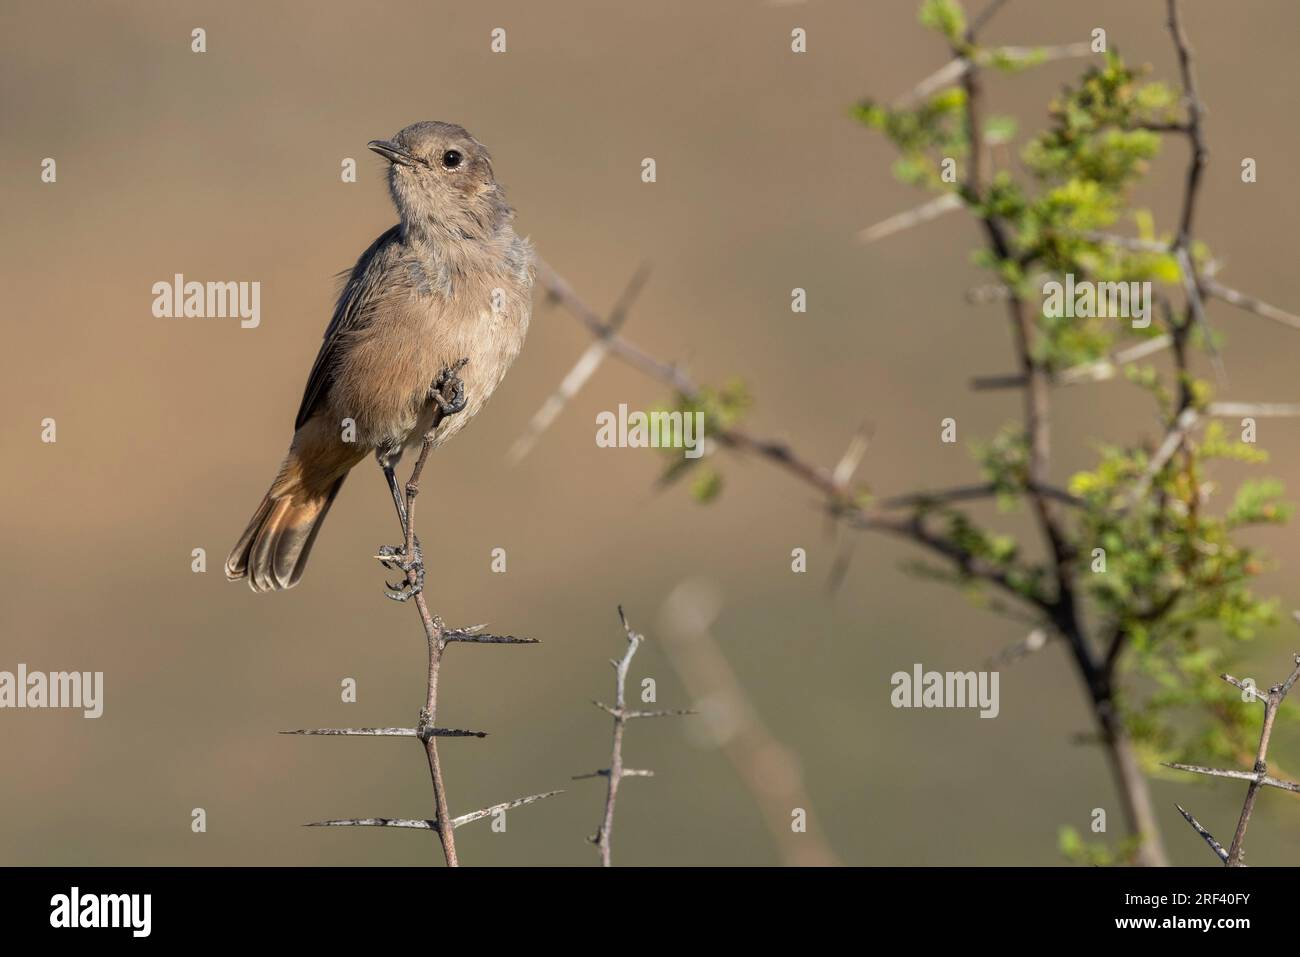 A frontal view of the Familiar Chat which is a small passerine bird in the Karoo National Park, South Africa Stock Photo